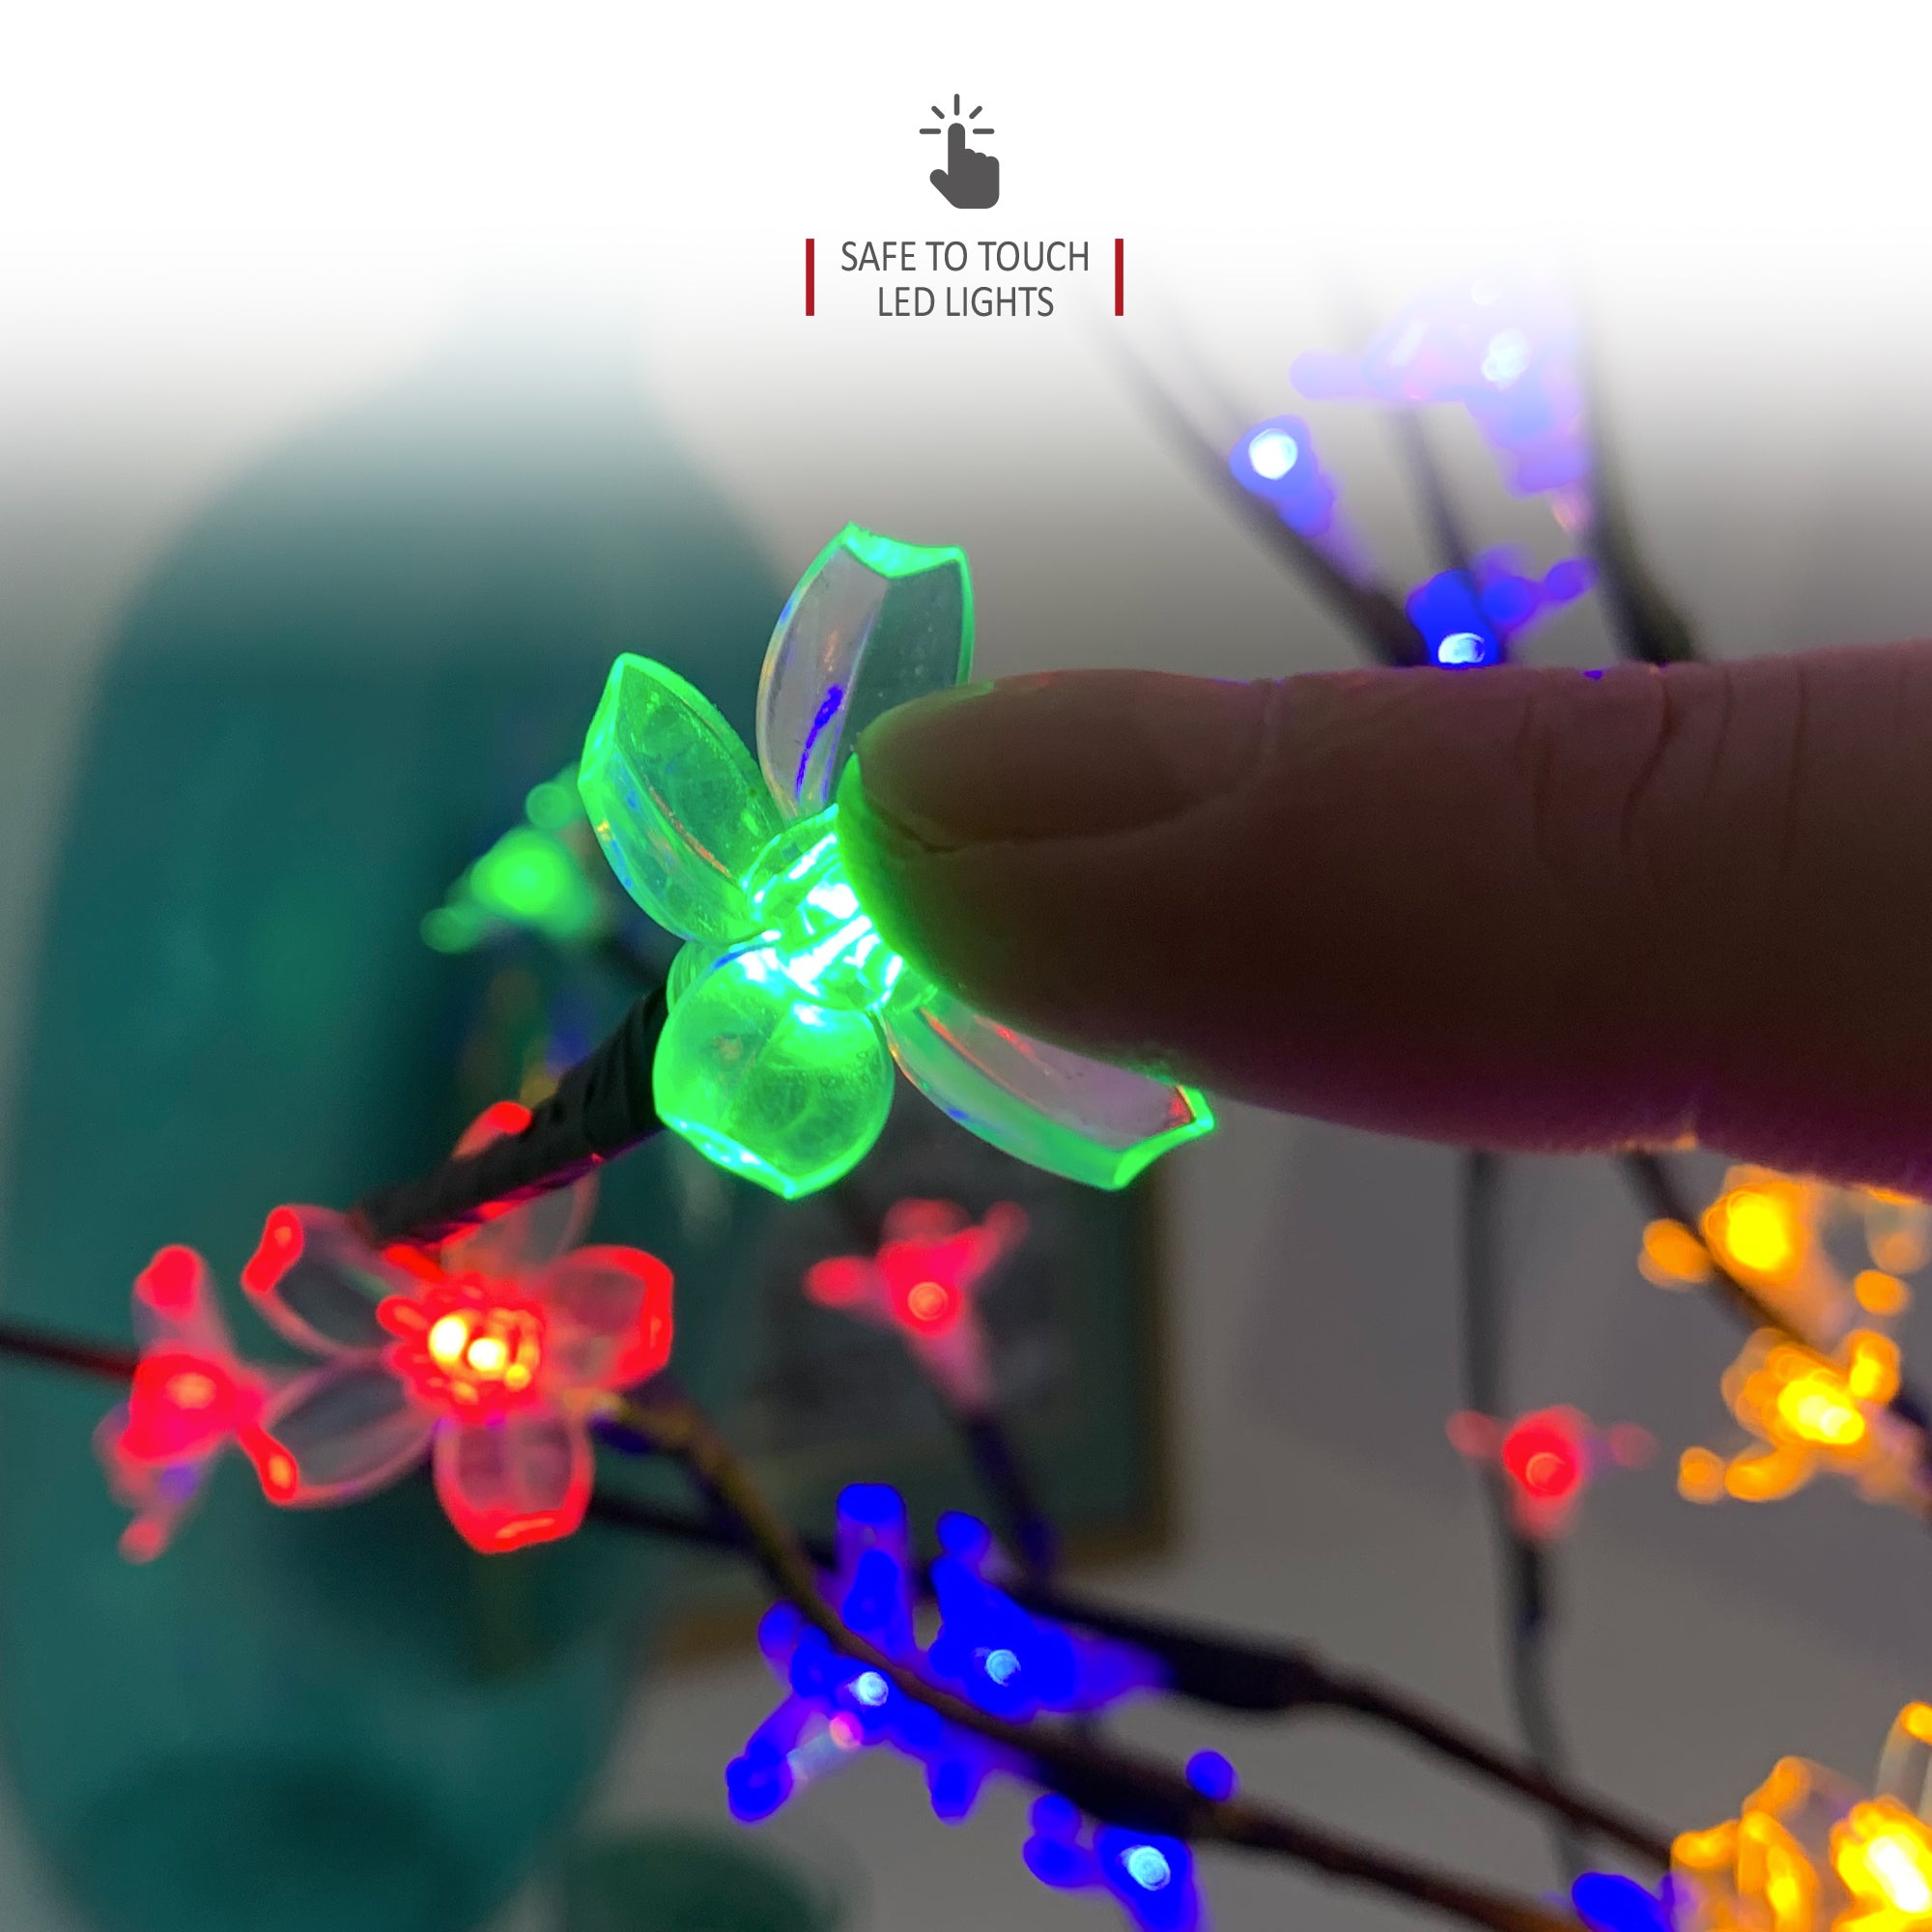 NETTA 6FT LED Cherry Blossom Tree, Pre-Lit 300 Lights, Auto-Off Timer and 8 Lighting Modes, 3M Power Cable, Suitable for Indoor and Outdoor Use - Mutli-Colour